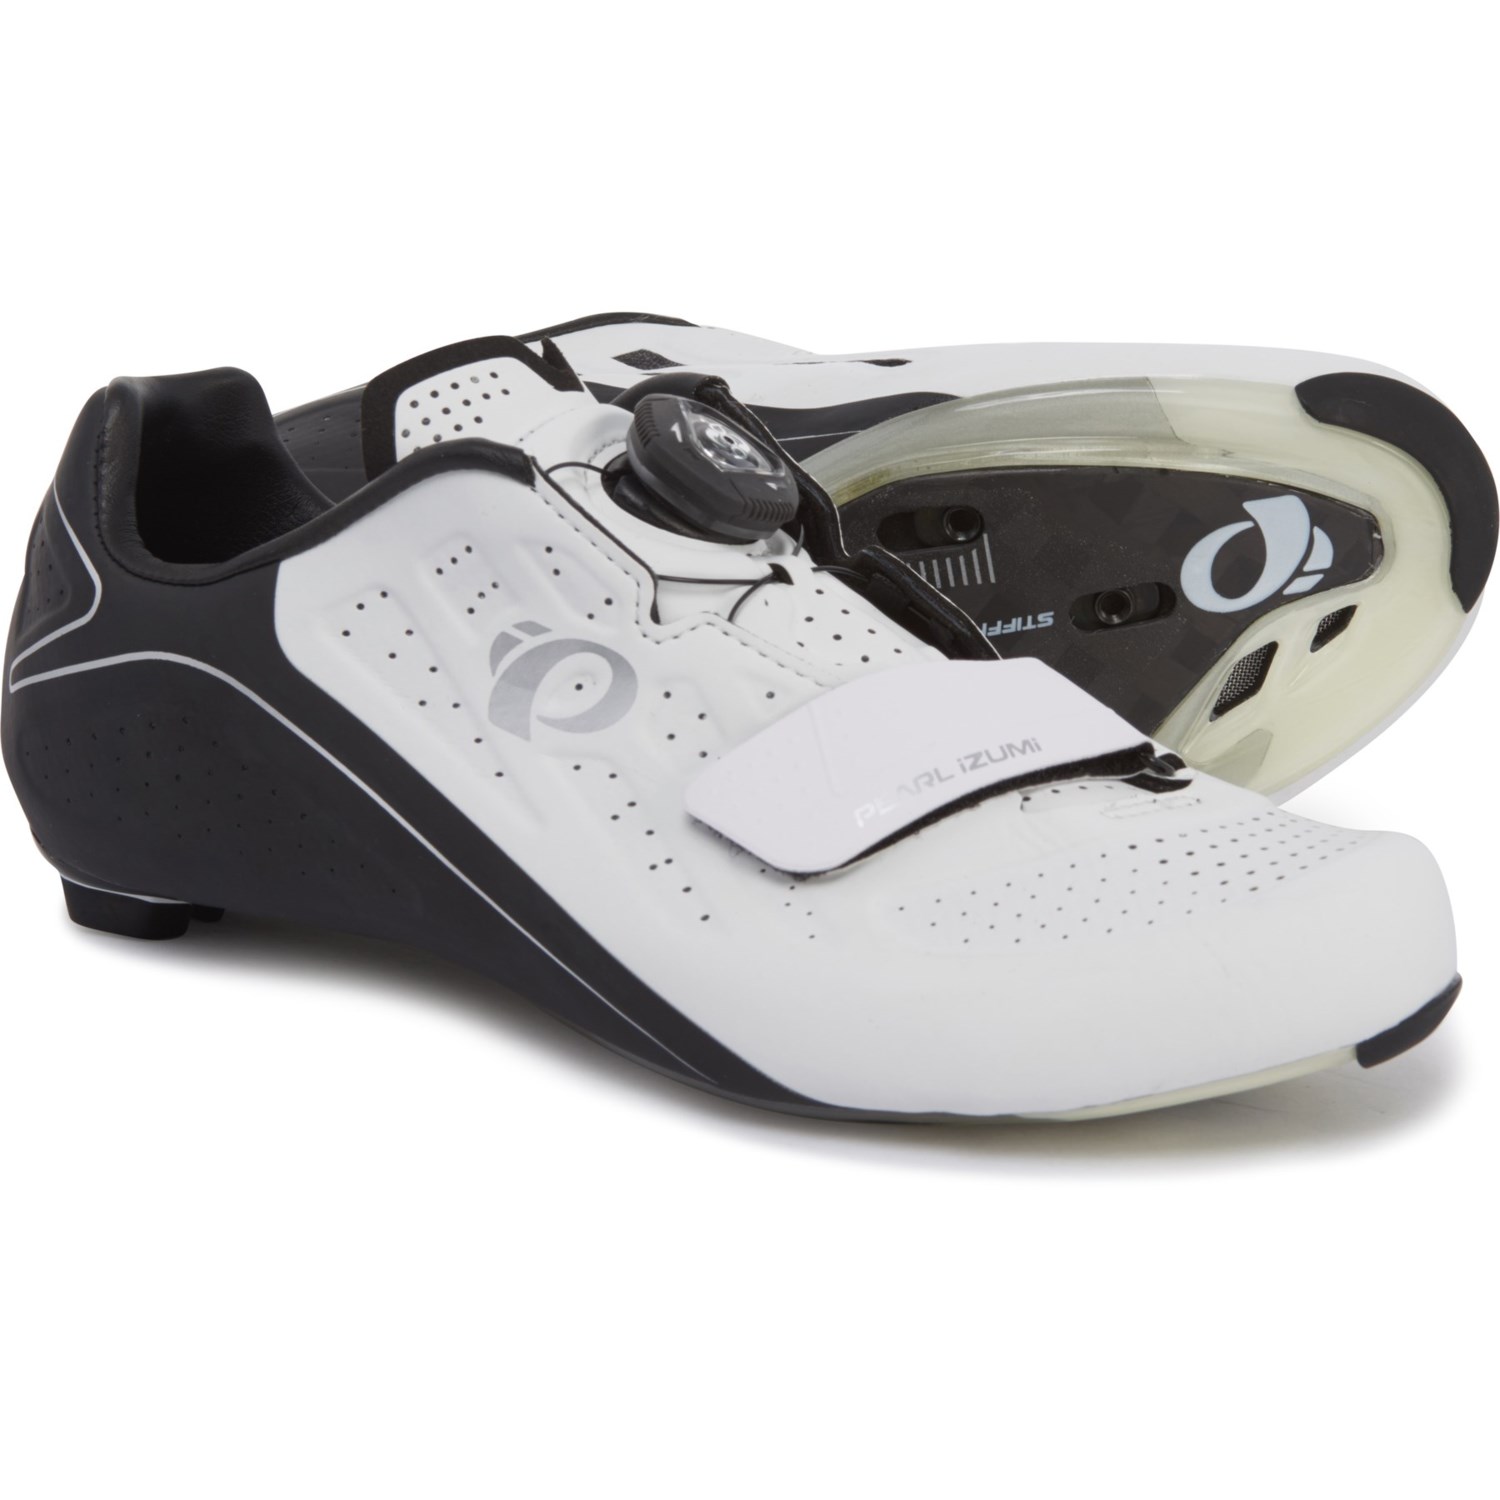 3 hole cycling cleats